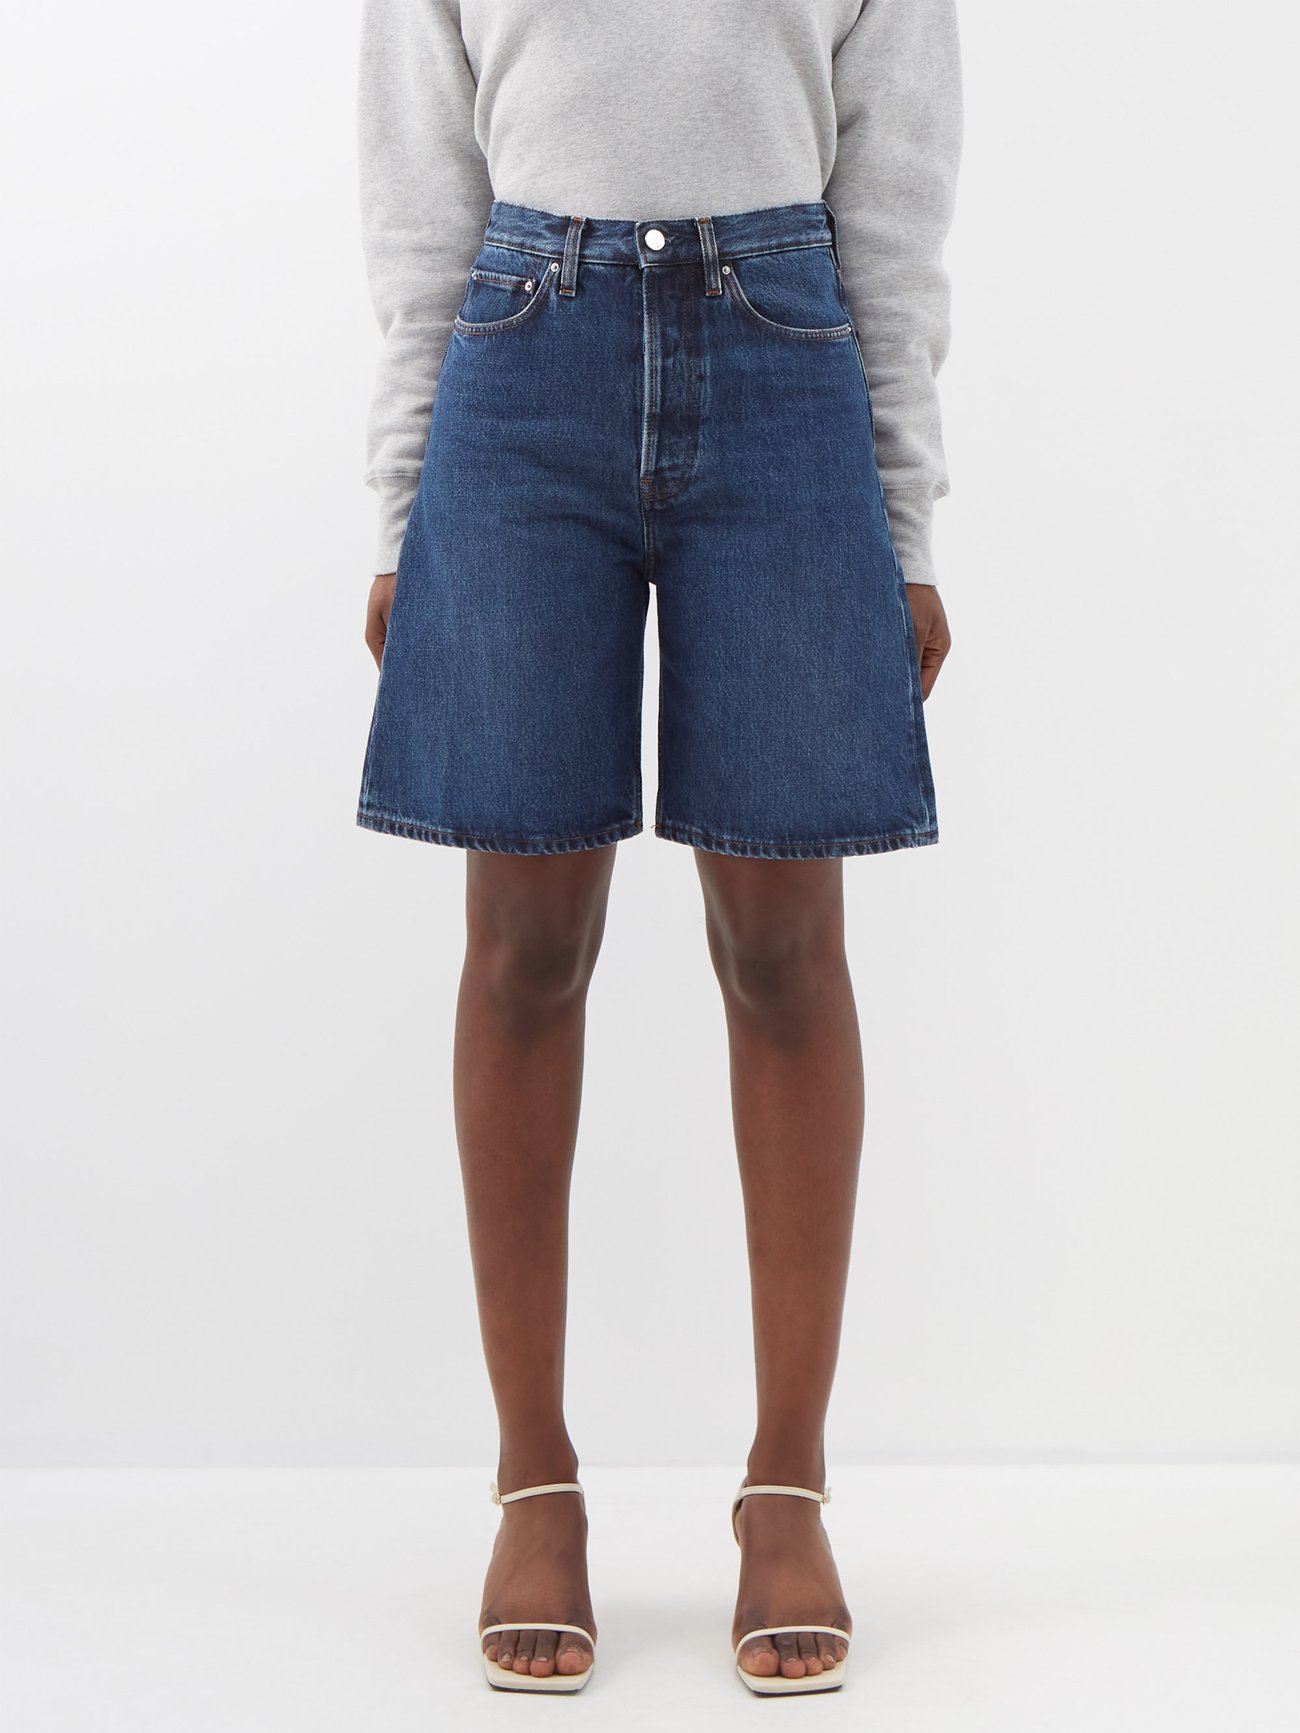 Toteme’s elevated take on the Bermuda short sees this blue high-rise version rendered in washed organic-cotton denim stamped with a leather logo patch.